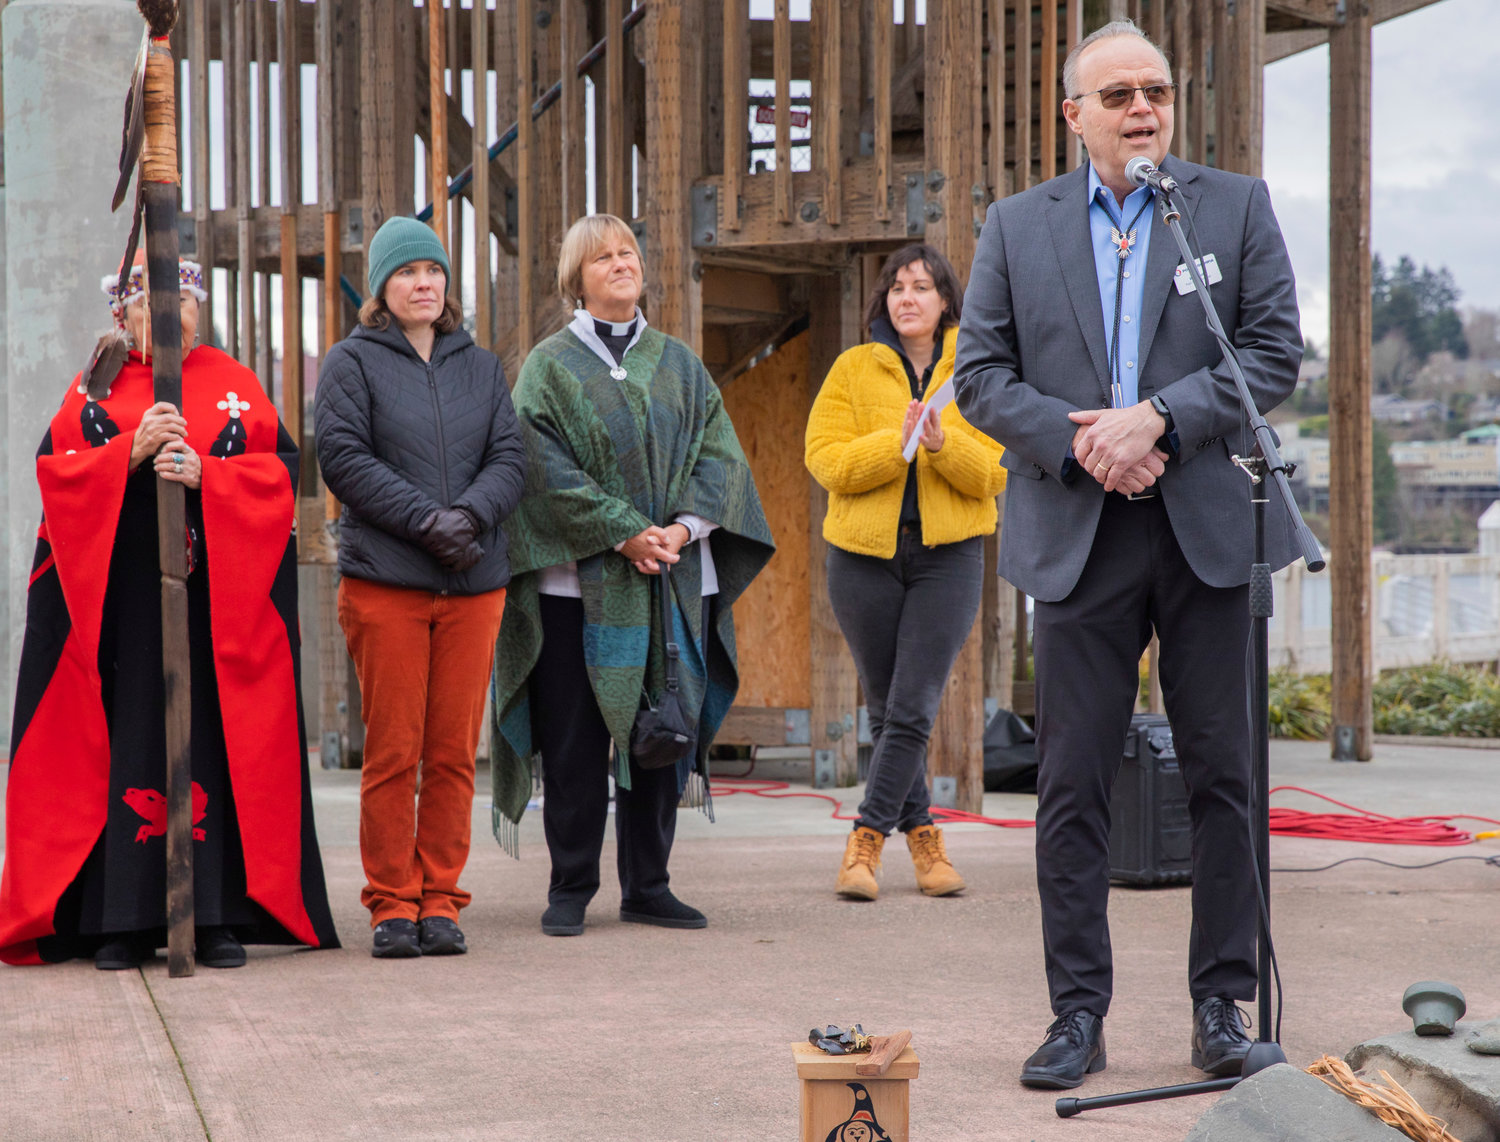 Thurston County Port Commissioner Bob Iyall talks to attendees during a prayer journey to protect Oak Flat, a land that is sacred to the San Carlos Apache Tribe, at an event hosted by Interfaith Works of Thurston County on Wednesday in Olympia.